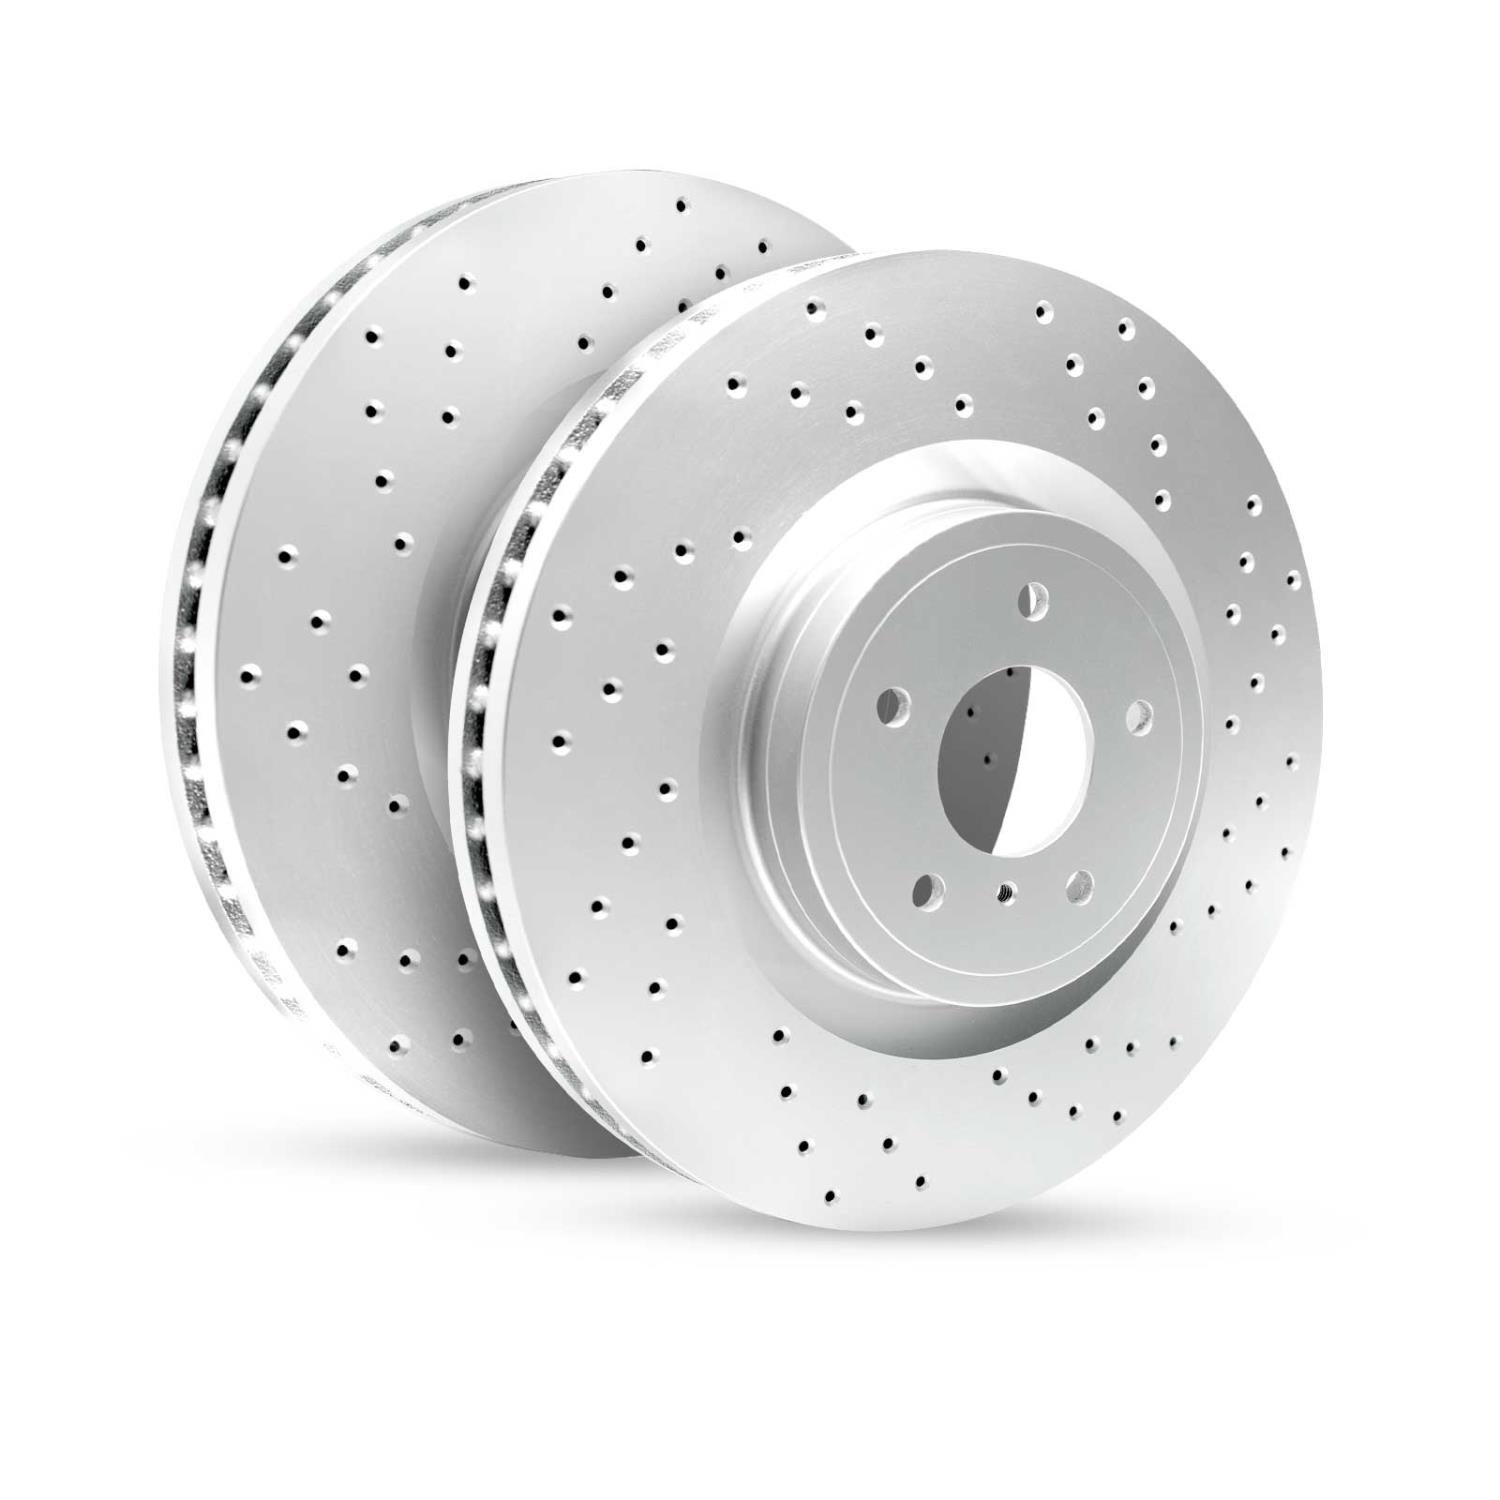 GEO-Carbon Drilled/Slotted Rotors, 2002-2018 Fits Multiple Makes/Models, Position: Rear